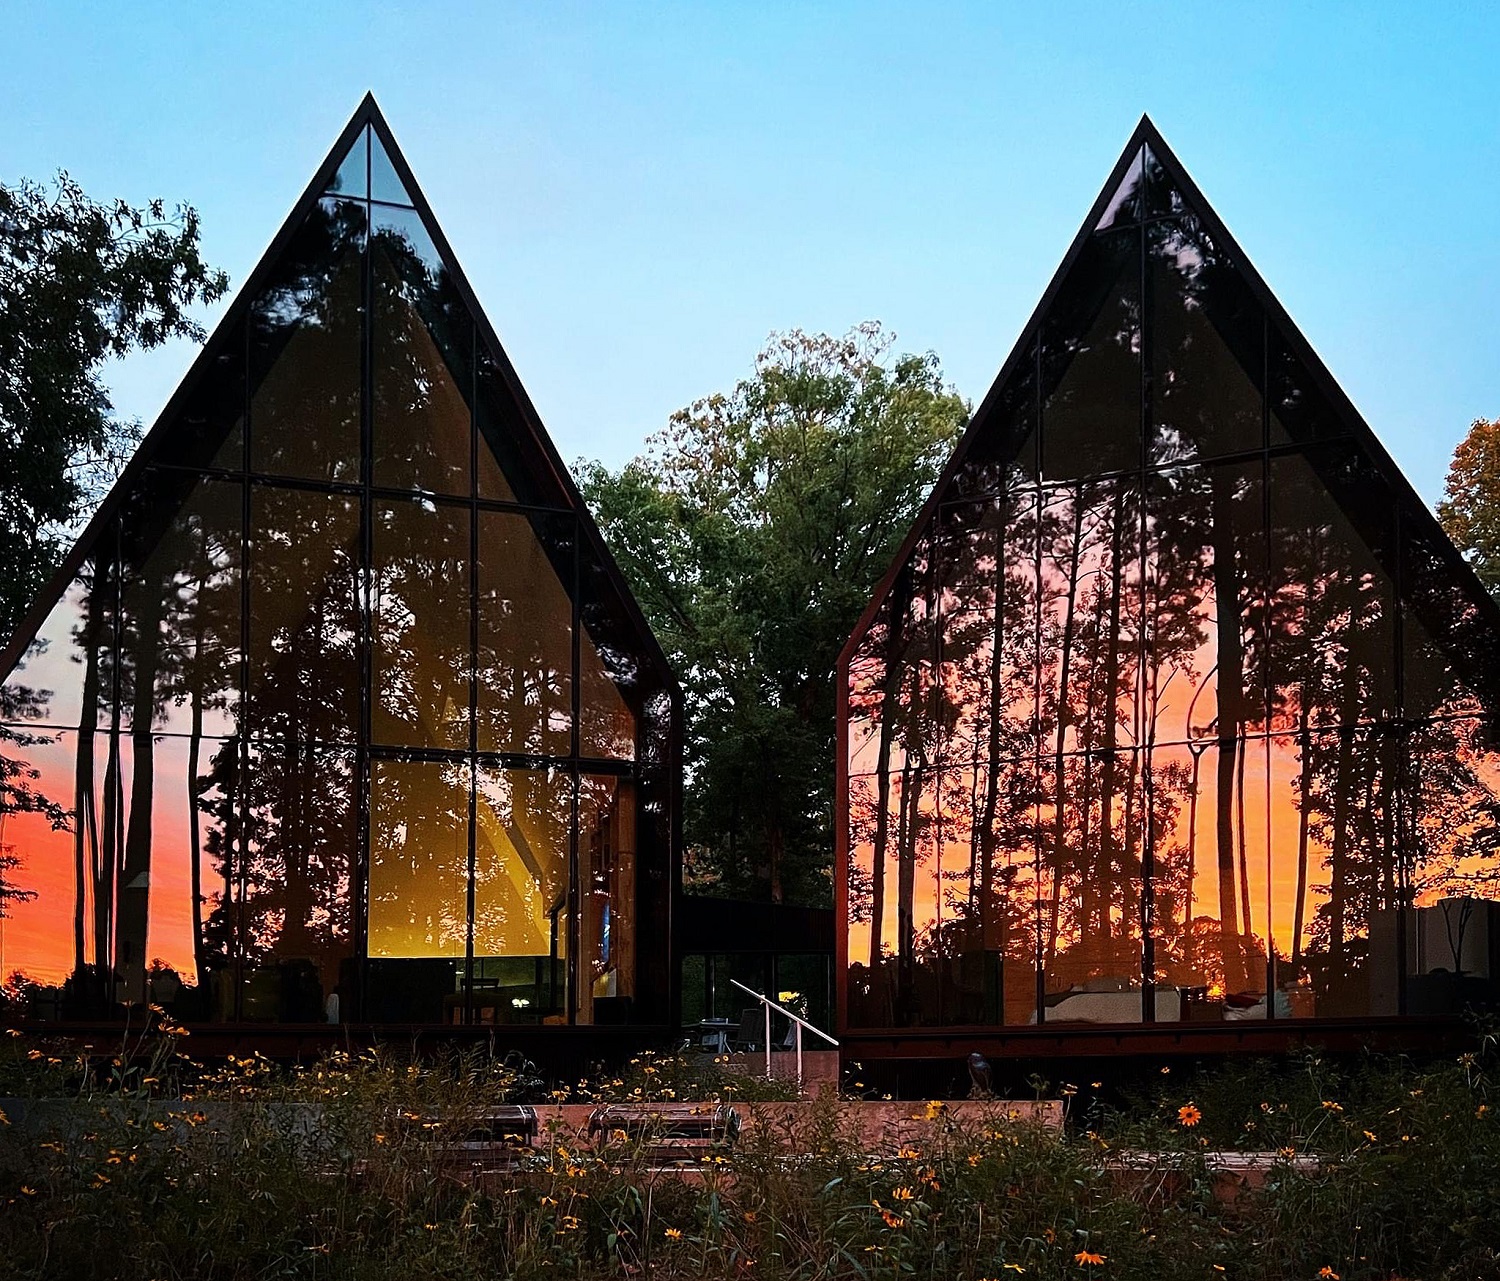 Late afternoon photo of Steeplechase. An all-glass face with two A-frames reflecting the silhouettes of trees during sunset